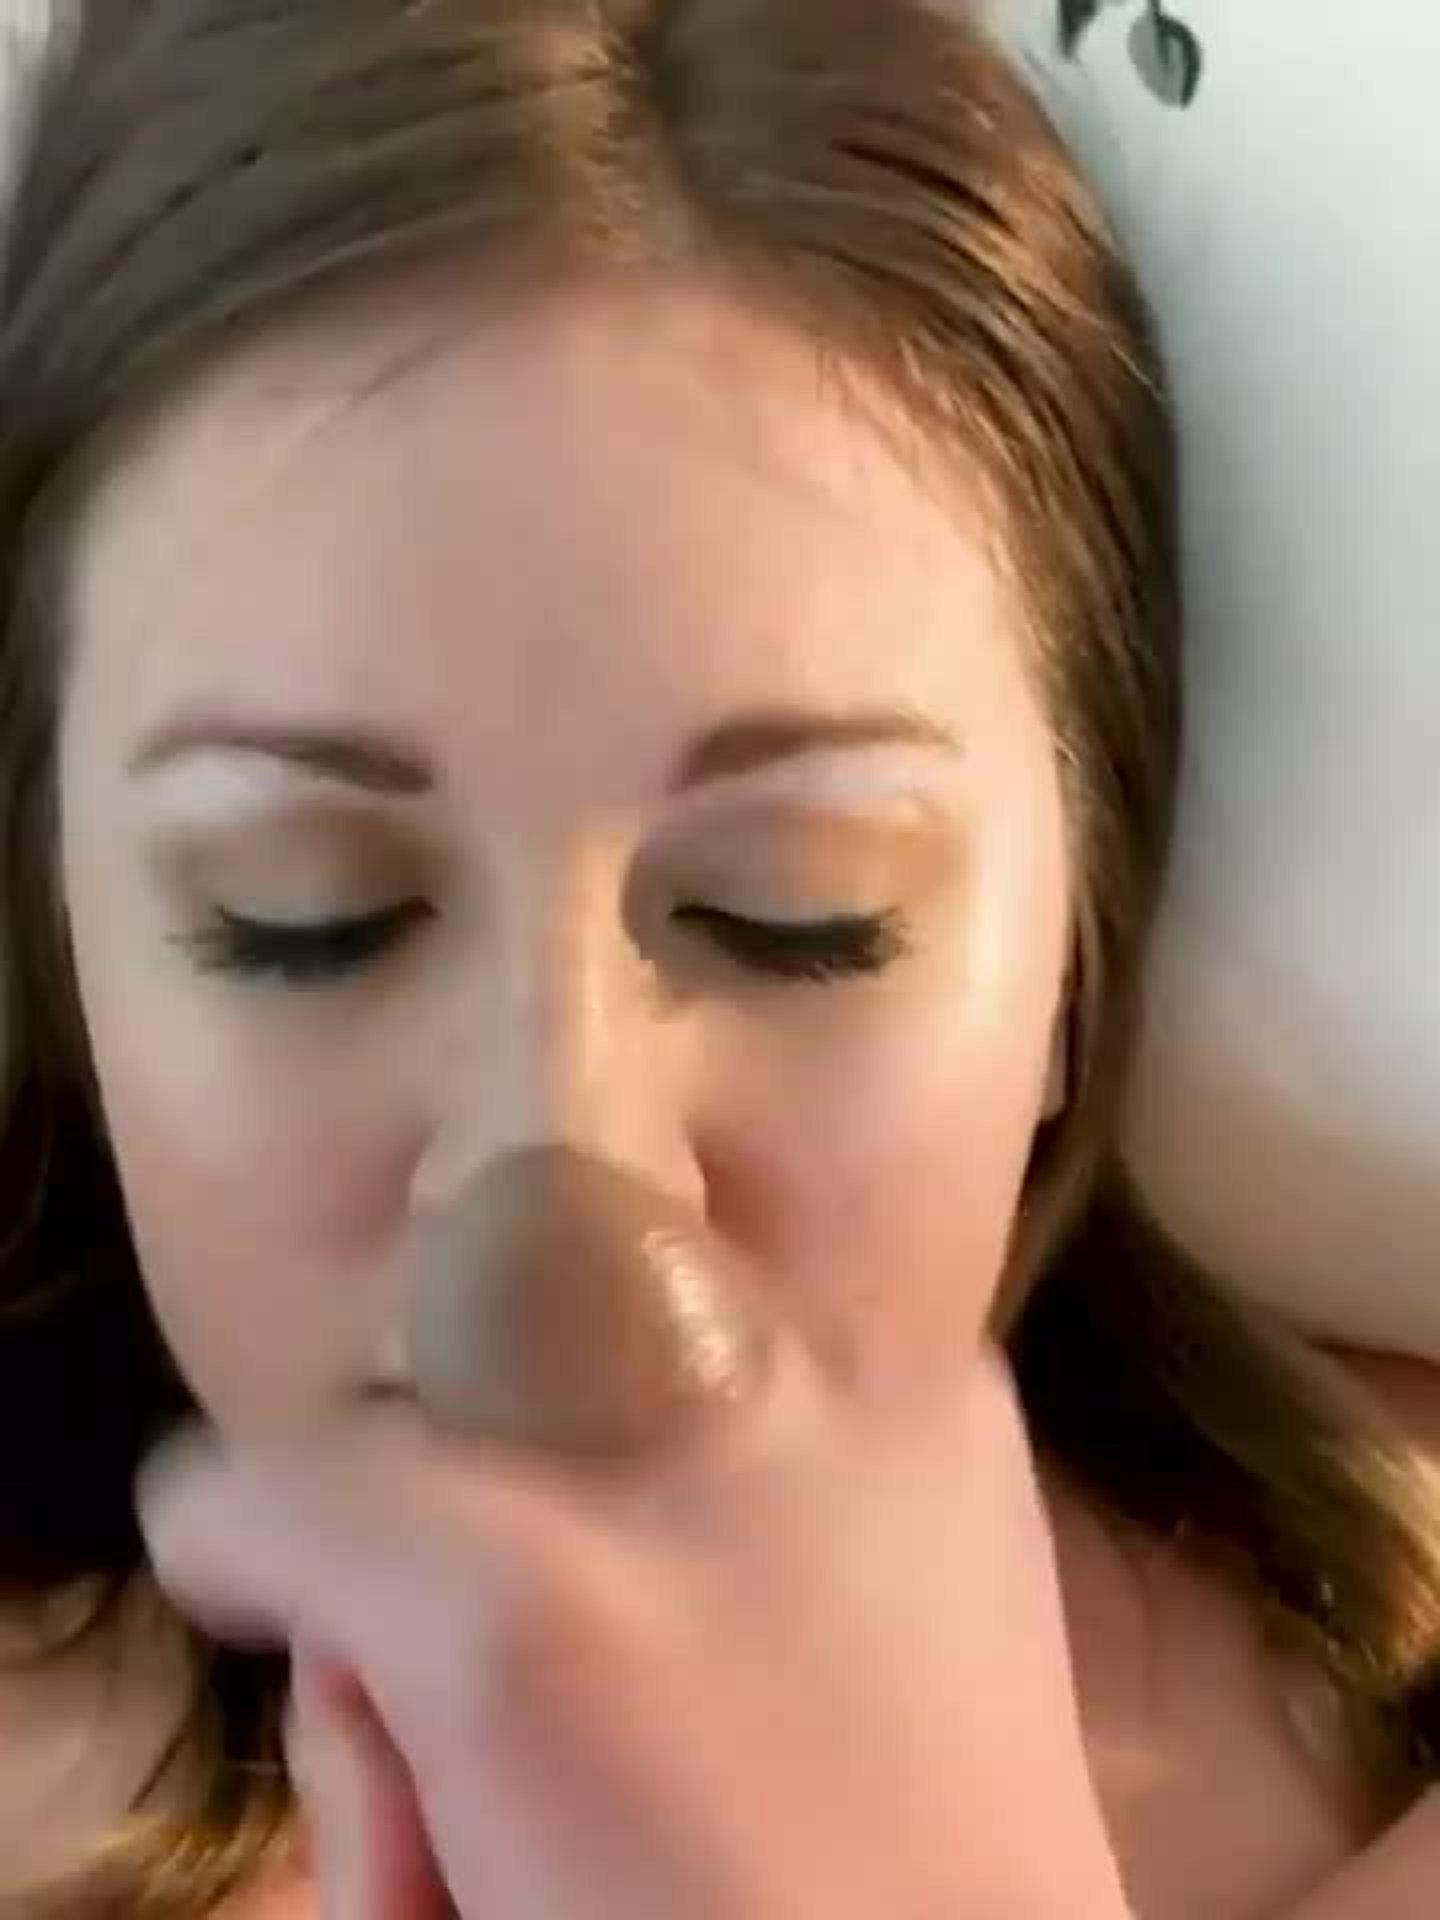 Video post by PornLife